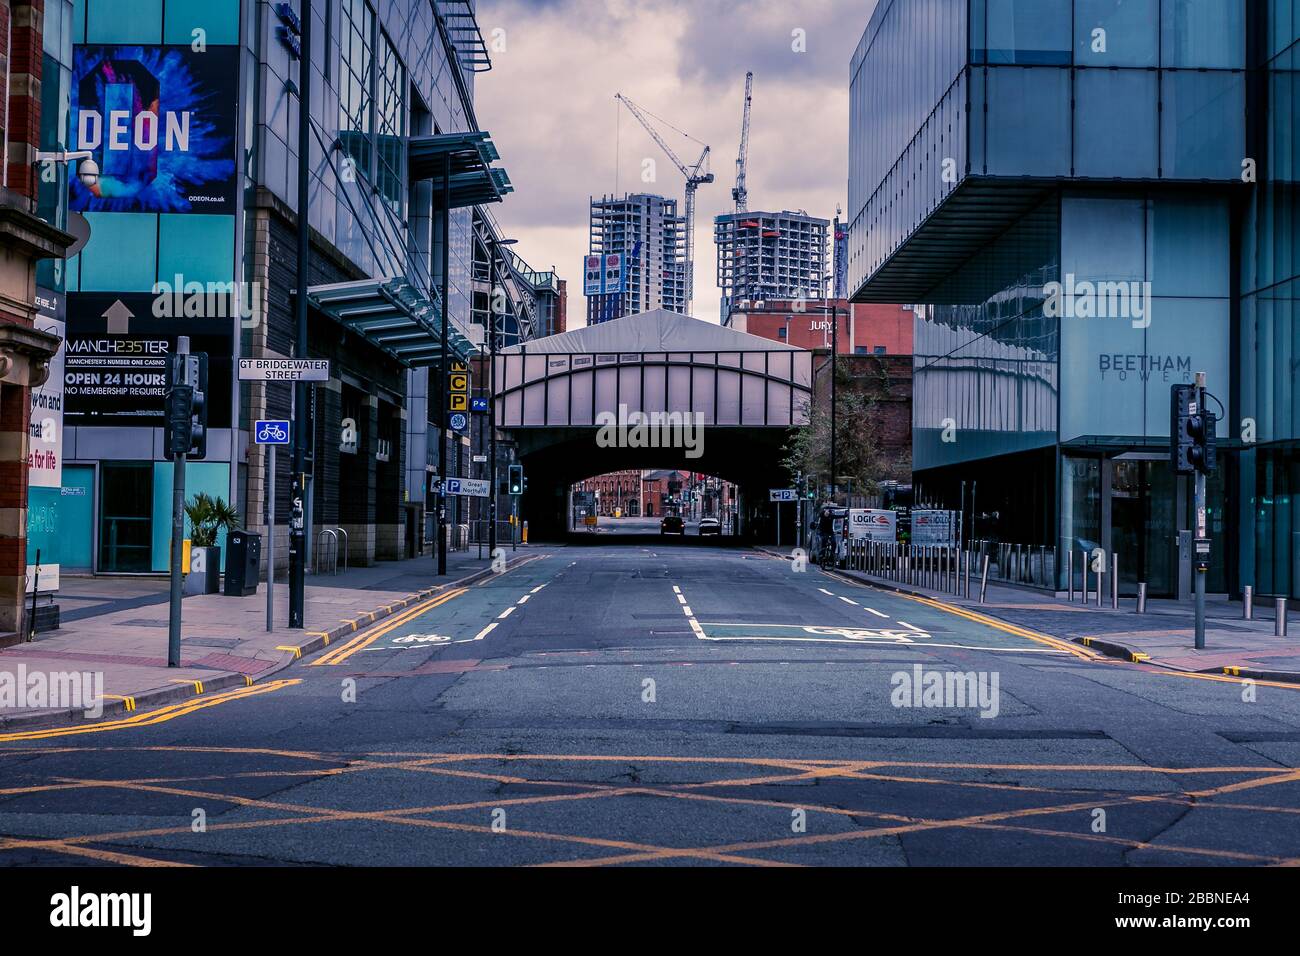 Deansgate, Manchester, United Kingdom. Empty streets during the coronavirus outbreak, April 2020. Stock Photo